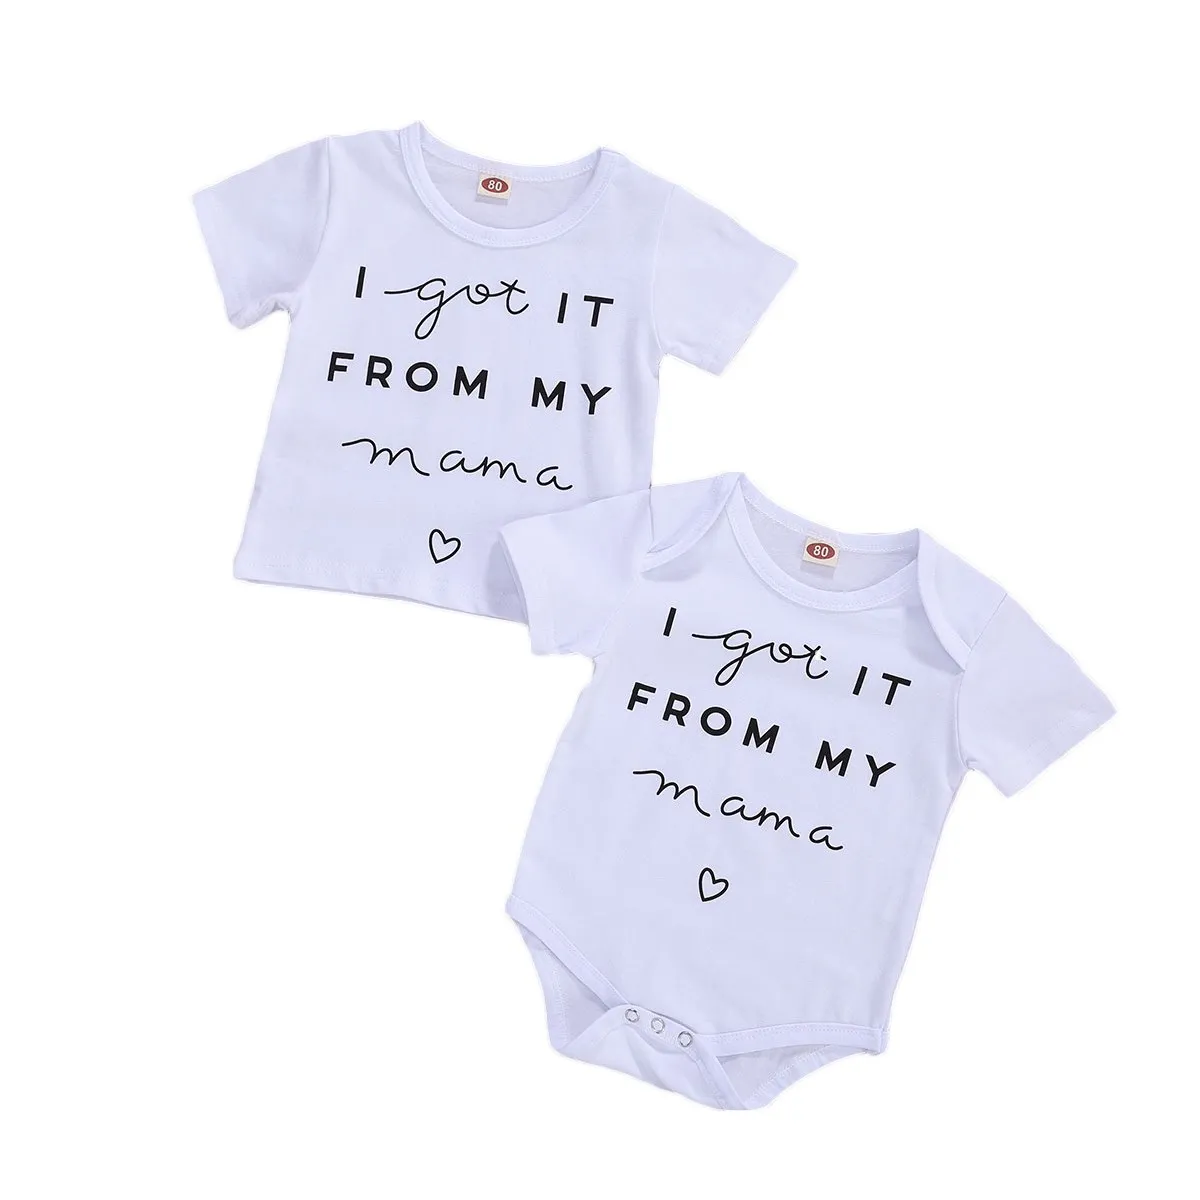 Baby Summer Clothing Family Matching Outfit Brother Sister Matching Short Sleeve I Got it from My Mama T-shirt Bodysuit